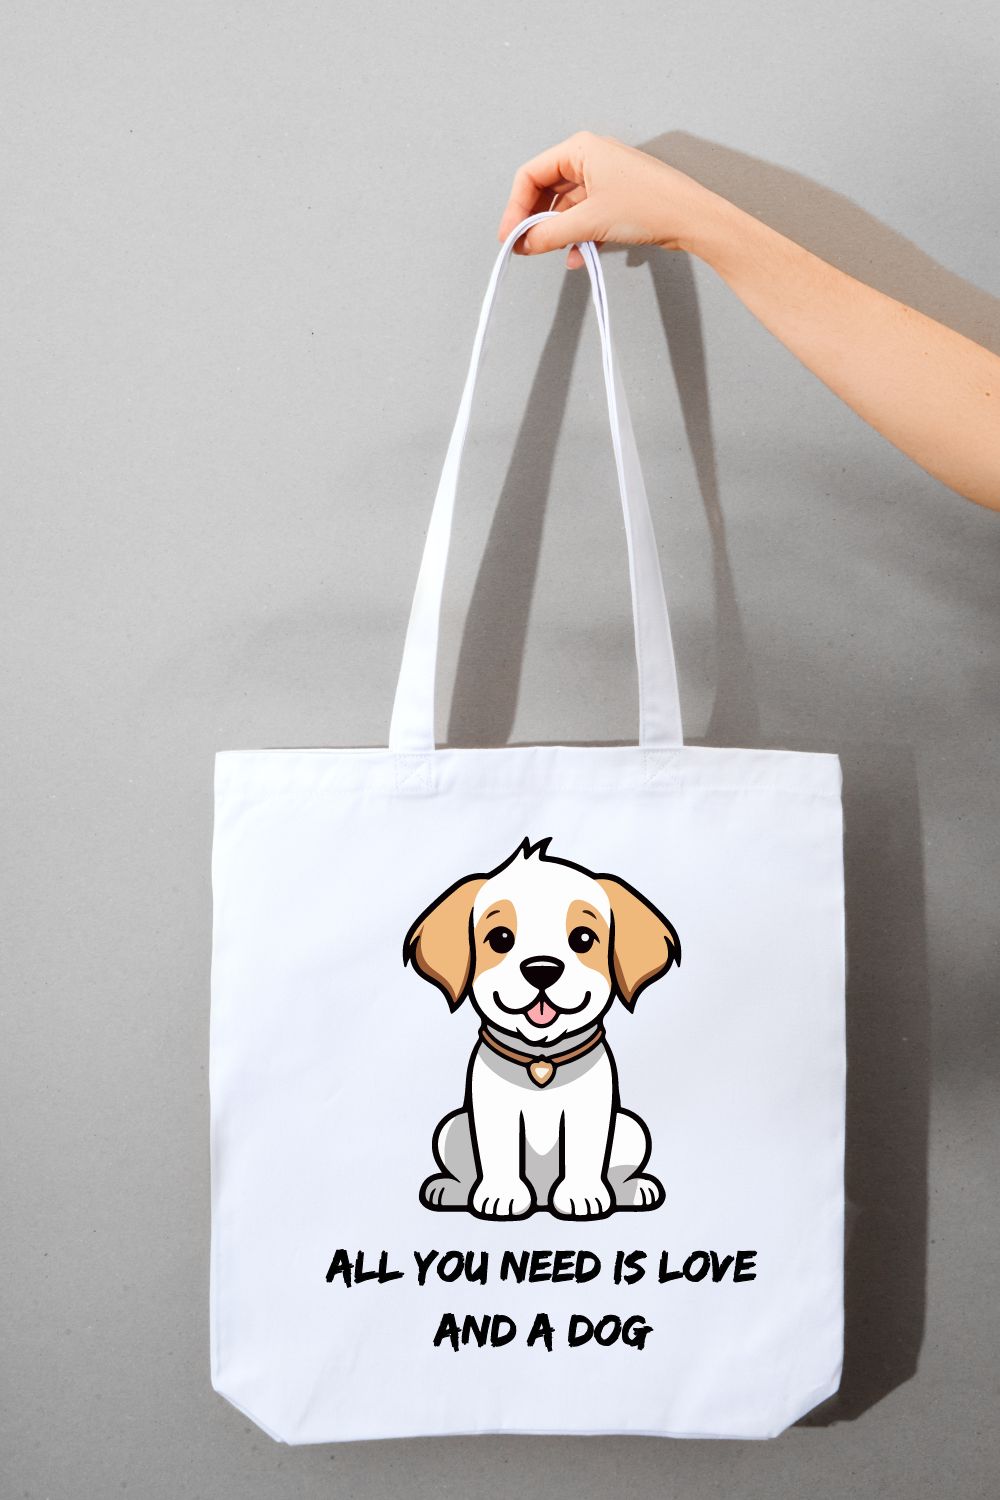 Adorable design “All You Need is Love and a Dog” pinterest preview image.